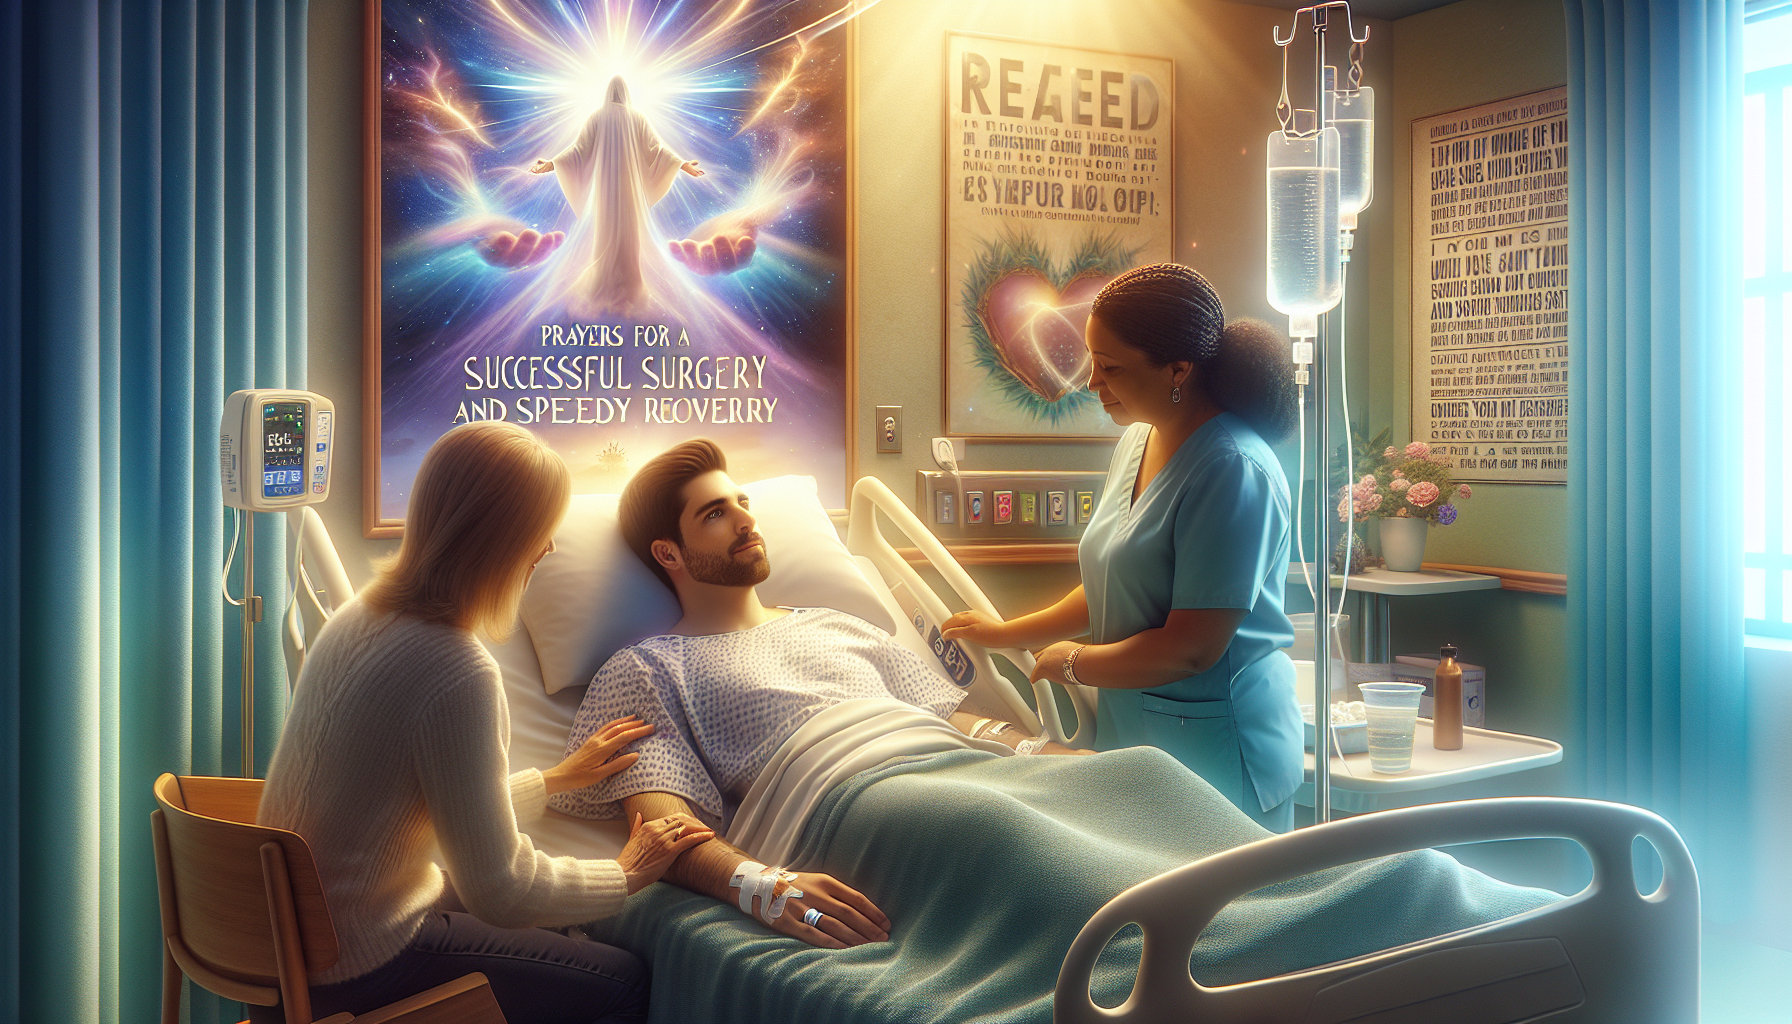 A warm and serene hospital room with soft, natural lighting. A patient lies in a bed, looking peaceful and hopeful. Beside the bed, a family member holds the patient's hand with a gentle, reassuring t